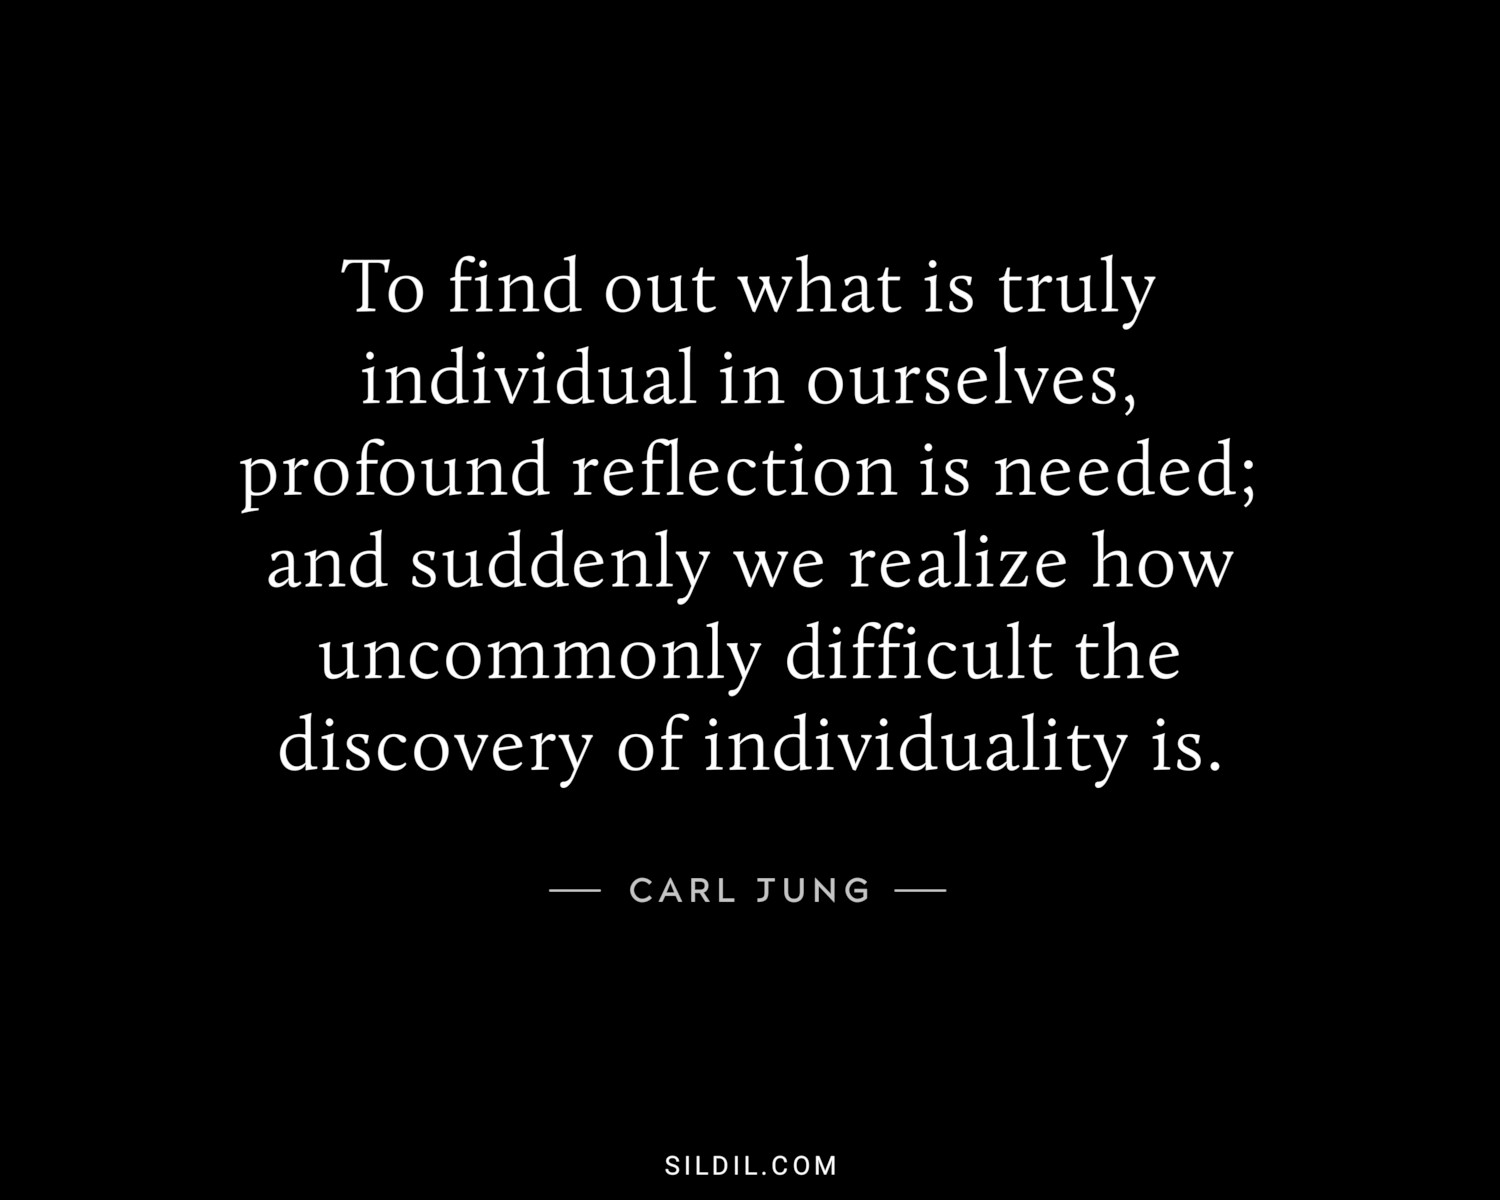 To find out what is truly individual in ourselves, profound reflection is needed; and suddenly we realize how uncommonly difficult the discovery of individuality is.